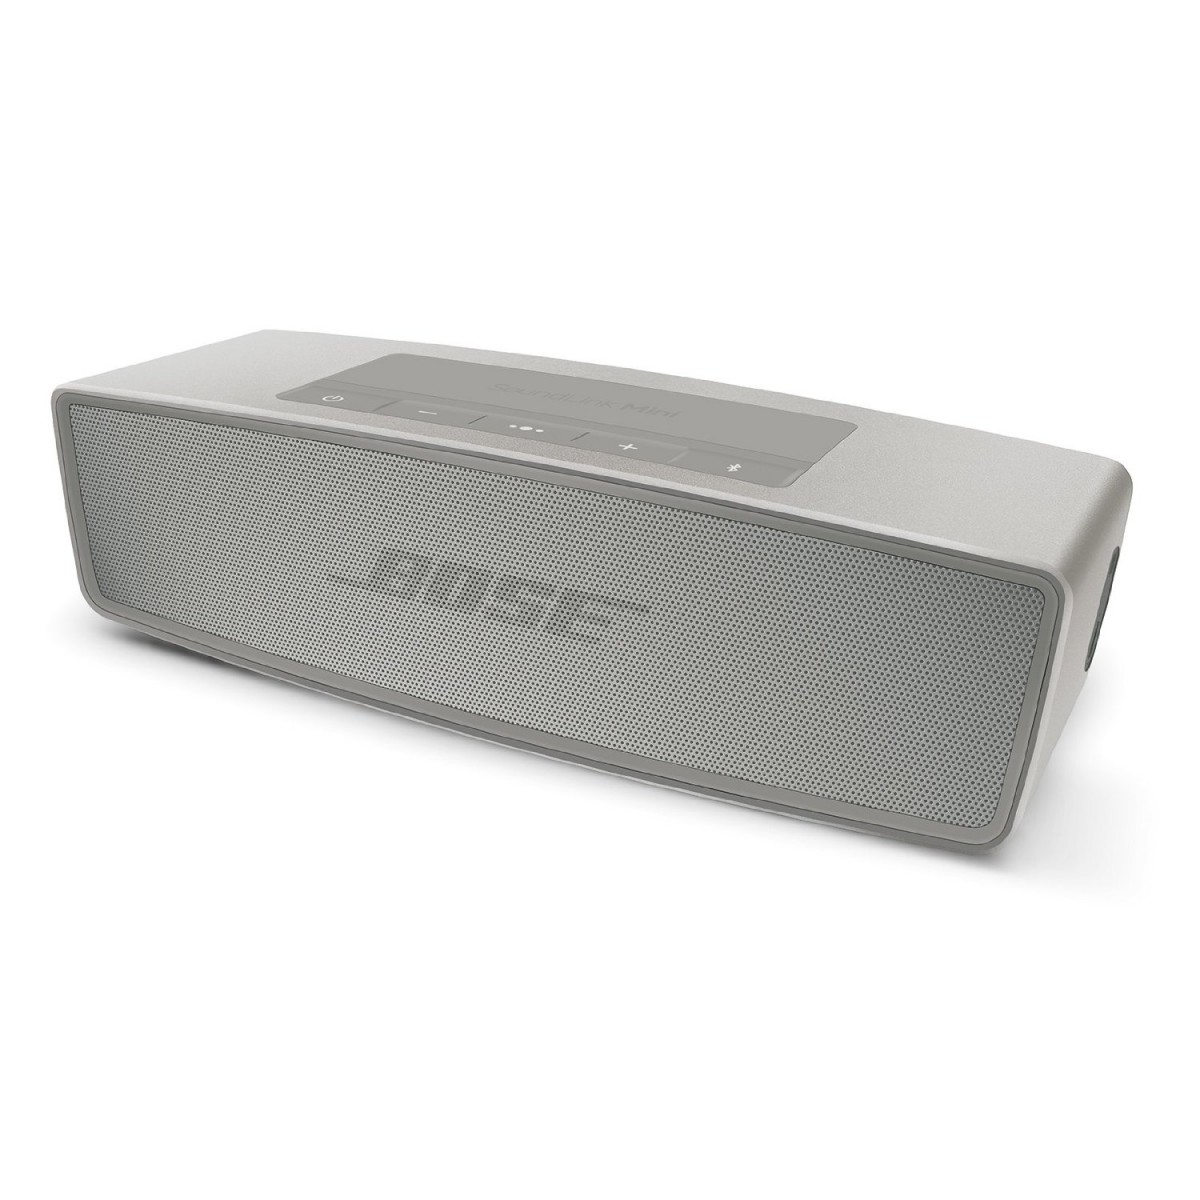 Bose SoundLink Mini II Review | Tested by GearLab